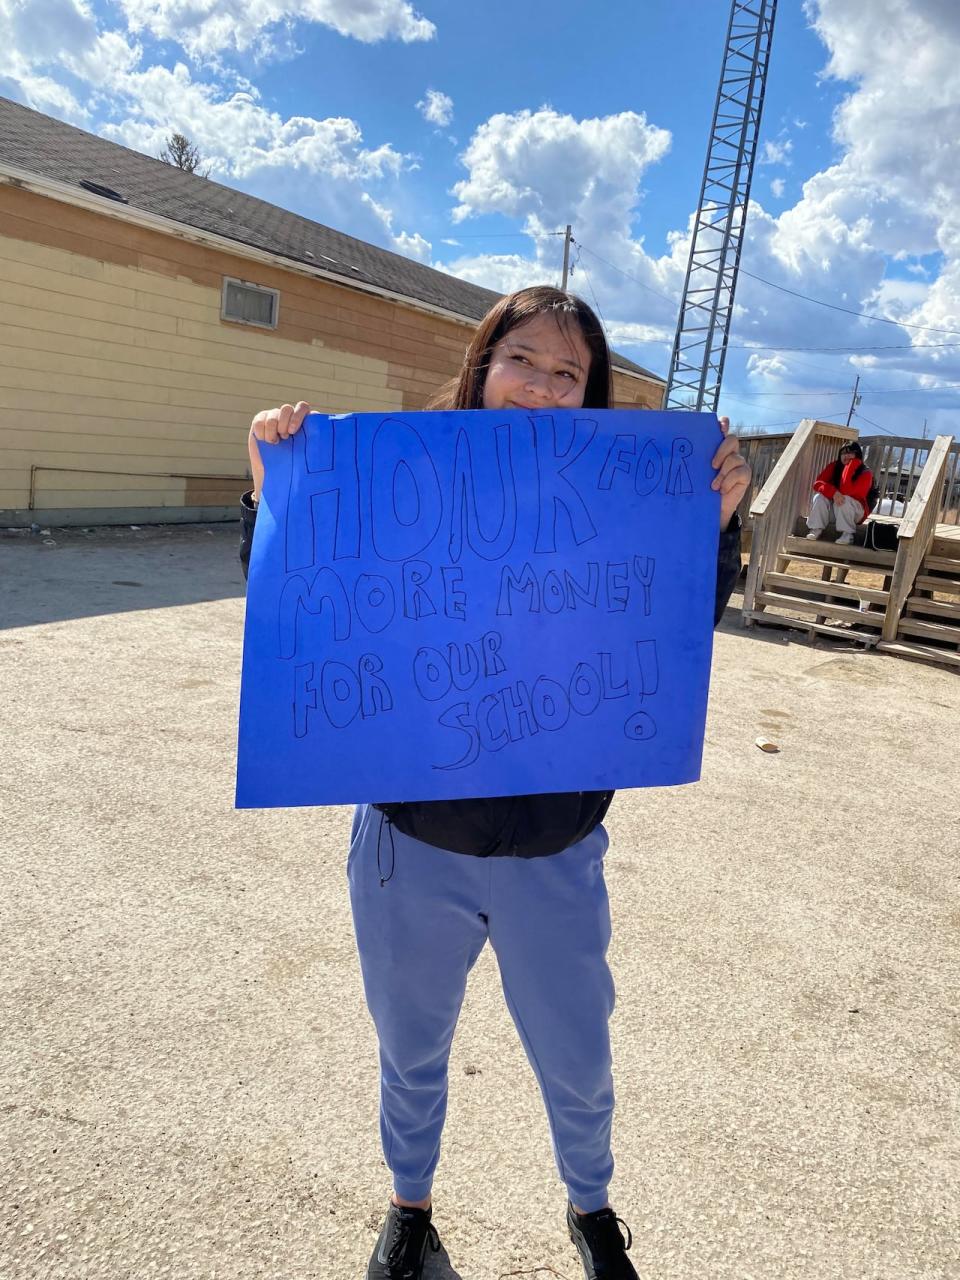 Students also held signs in support of receiving more money for their school.